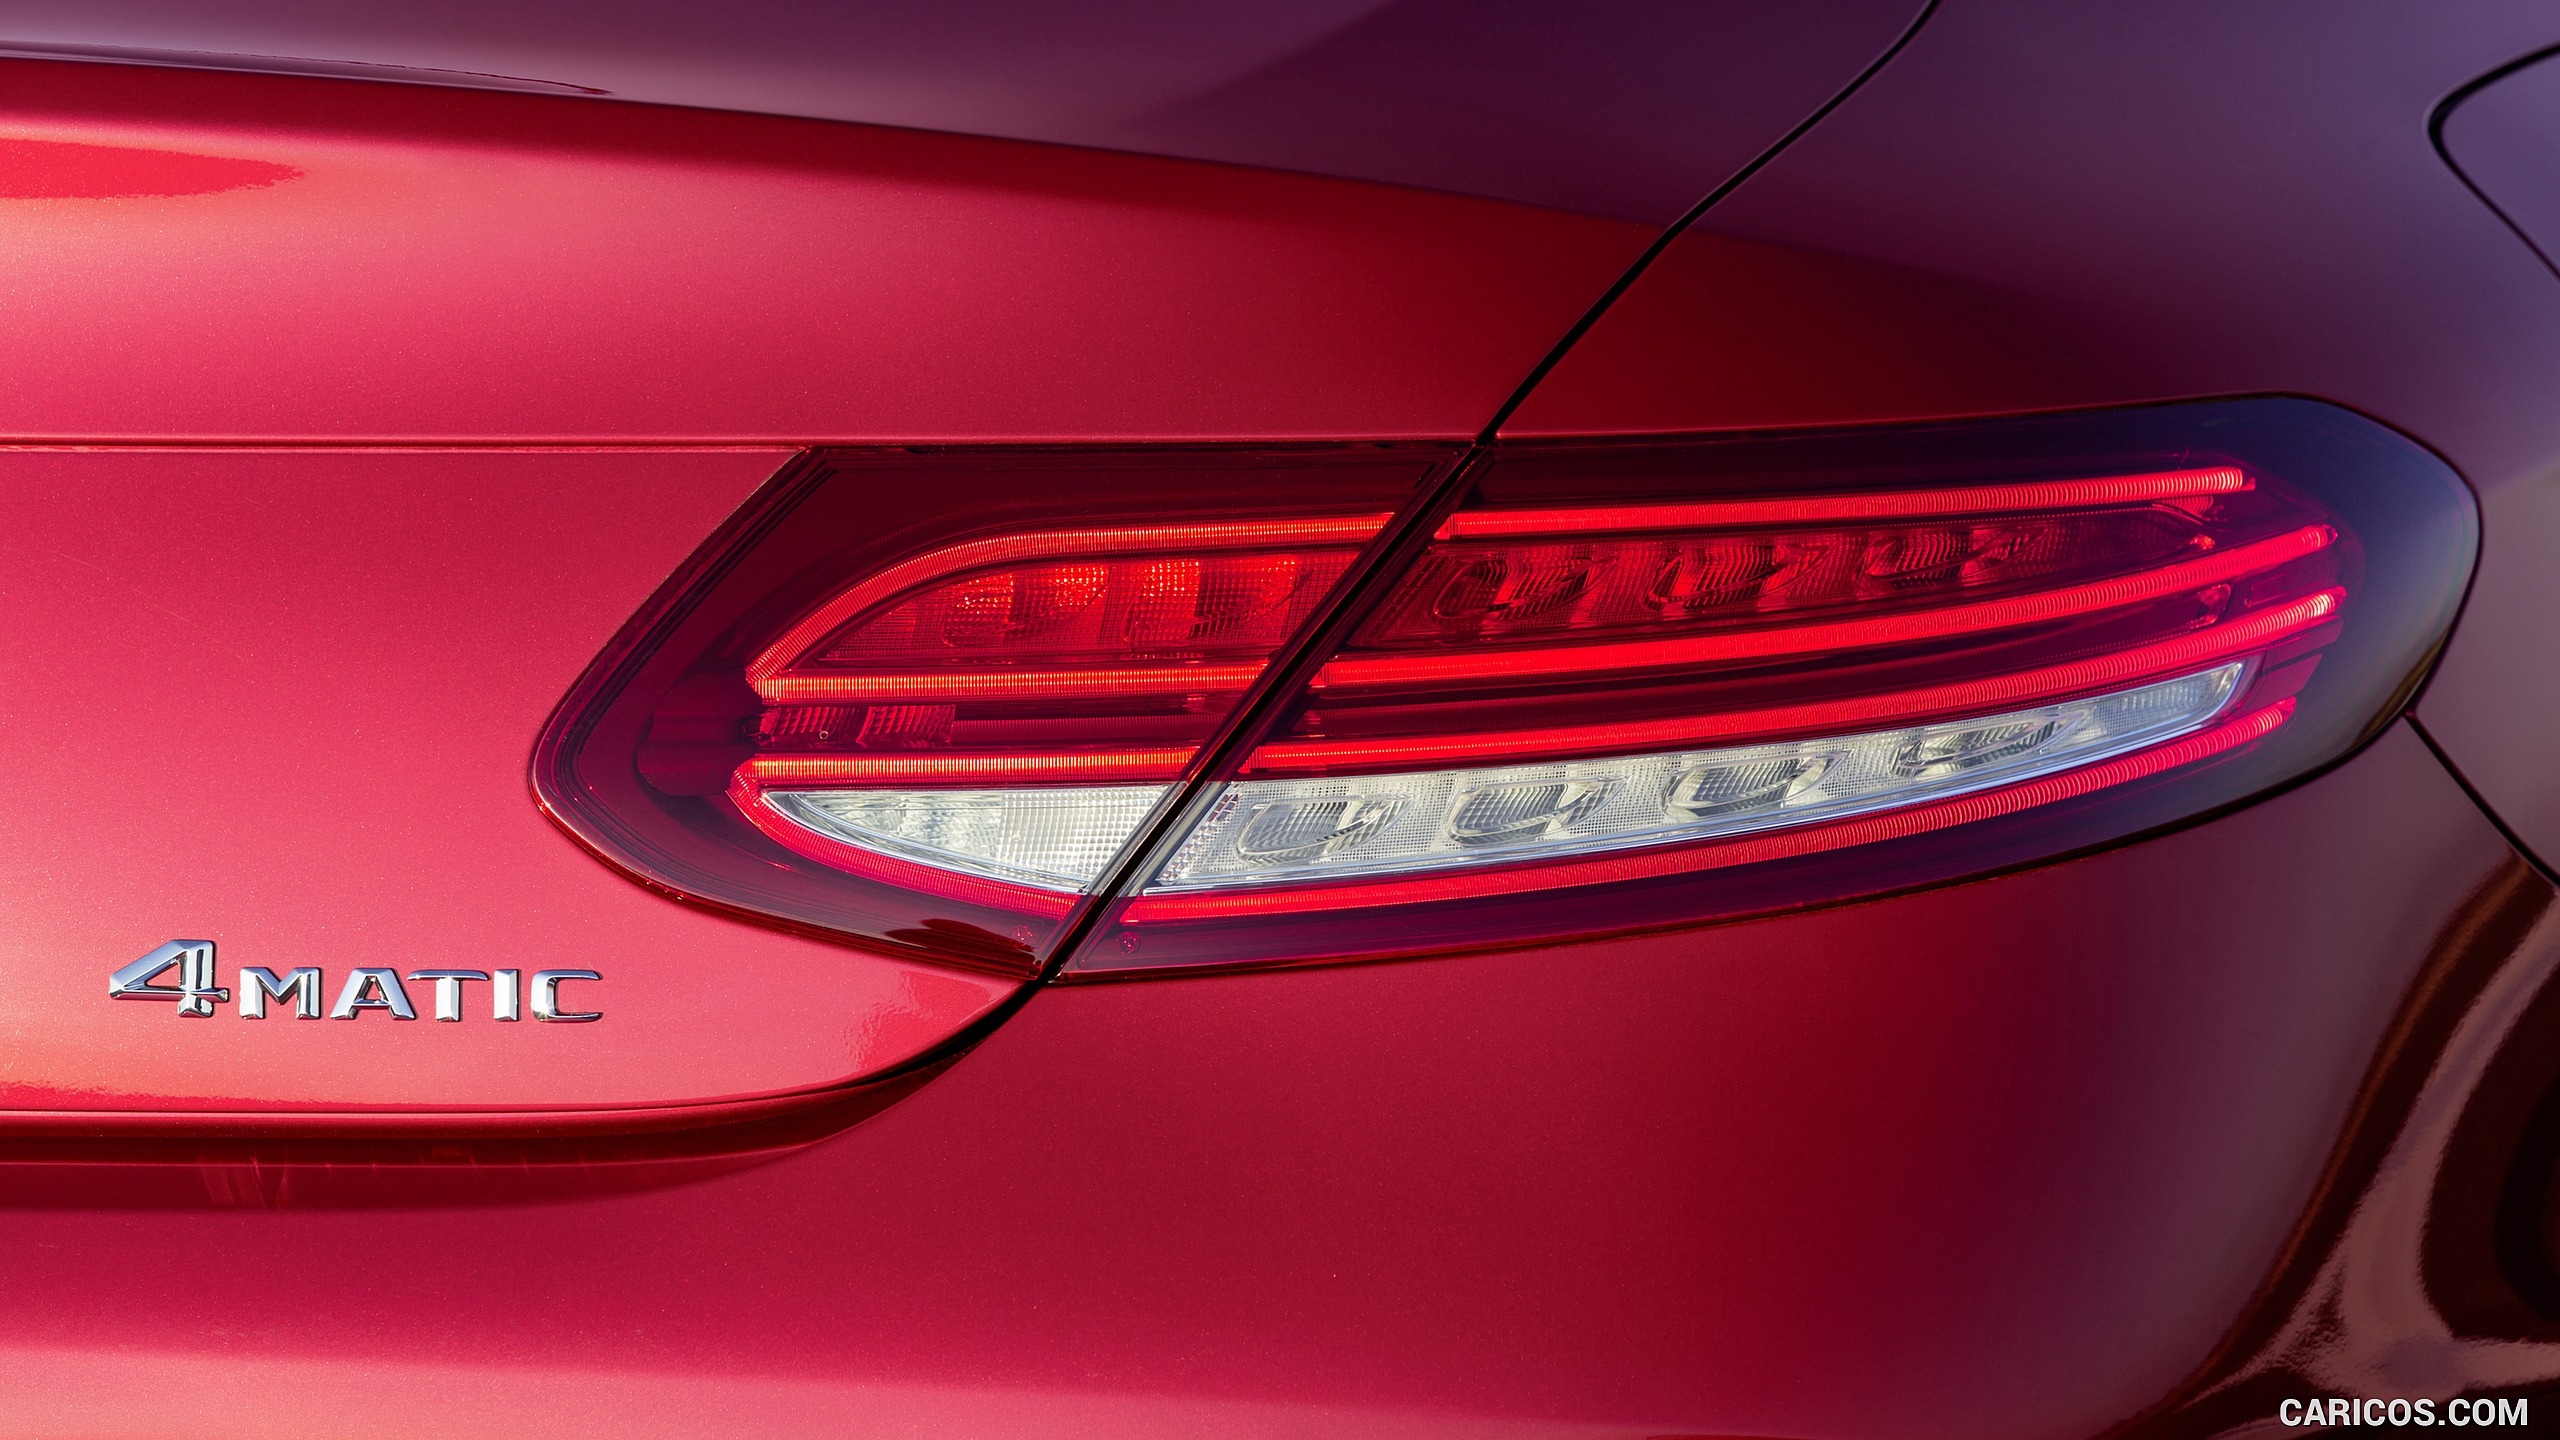 2017 Mercedes-Benz C-Class Coupe C250 d 4MATIC (Hyacinth Red) - Tail Light, #74 of 210